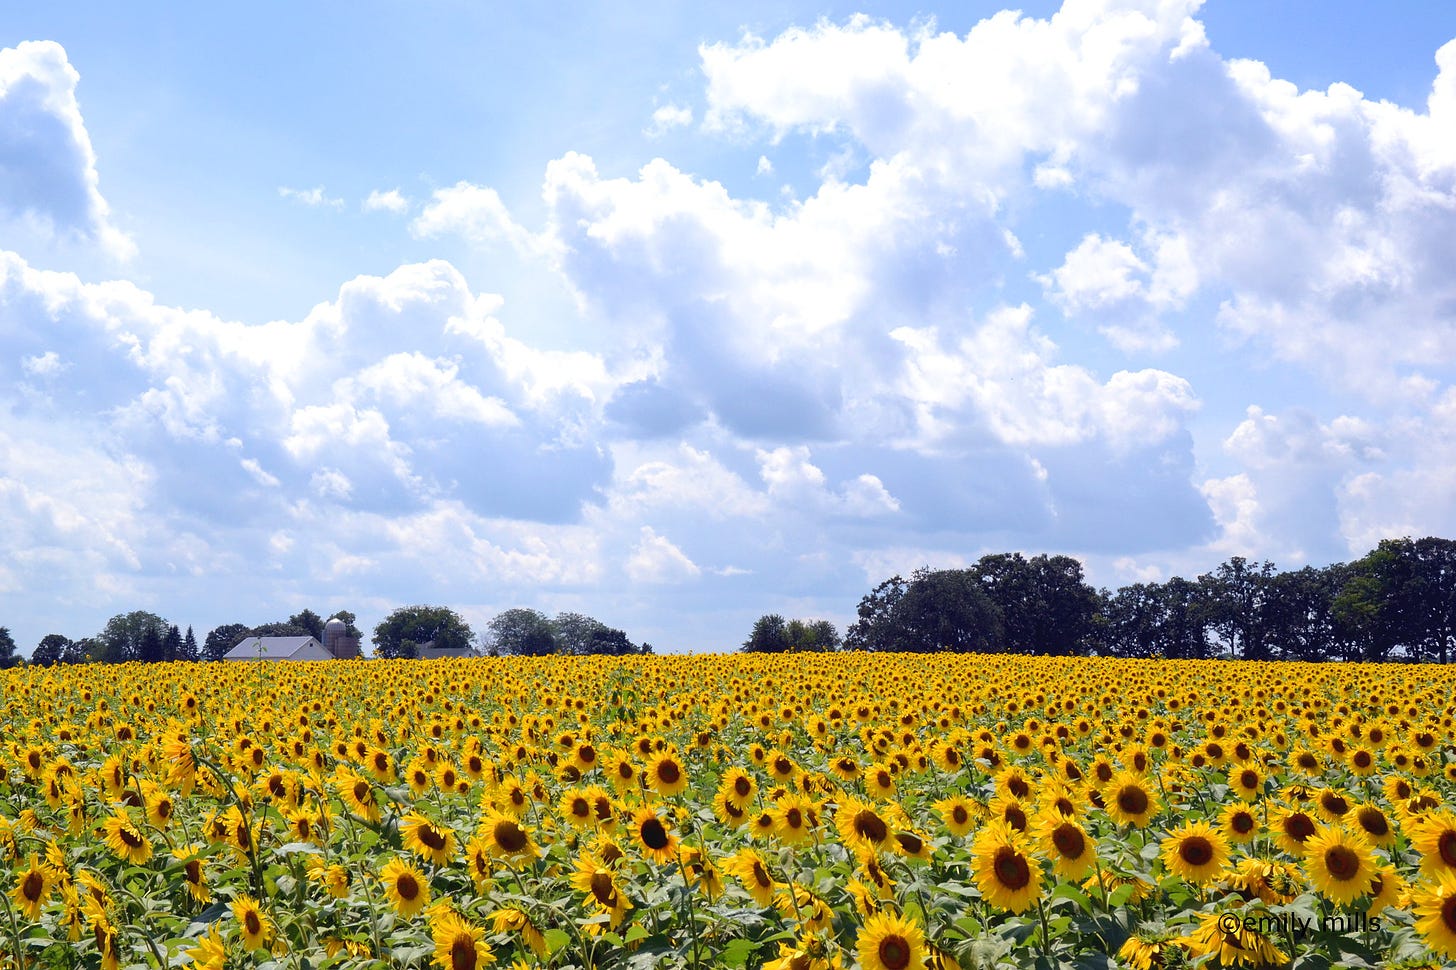 A field of golden sunflowers stretches out to the horizon, where a small farmstead can be seen. Blue sky and puffy white clouds are overhead.